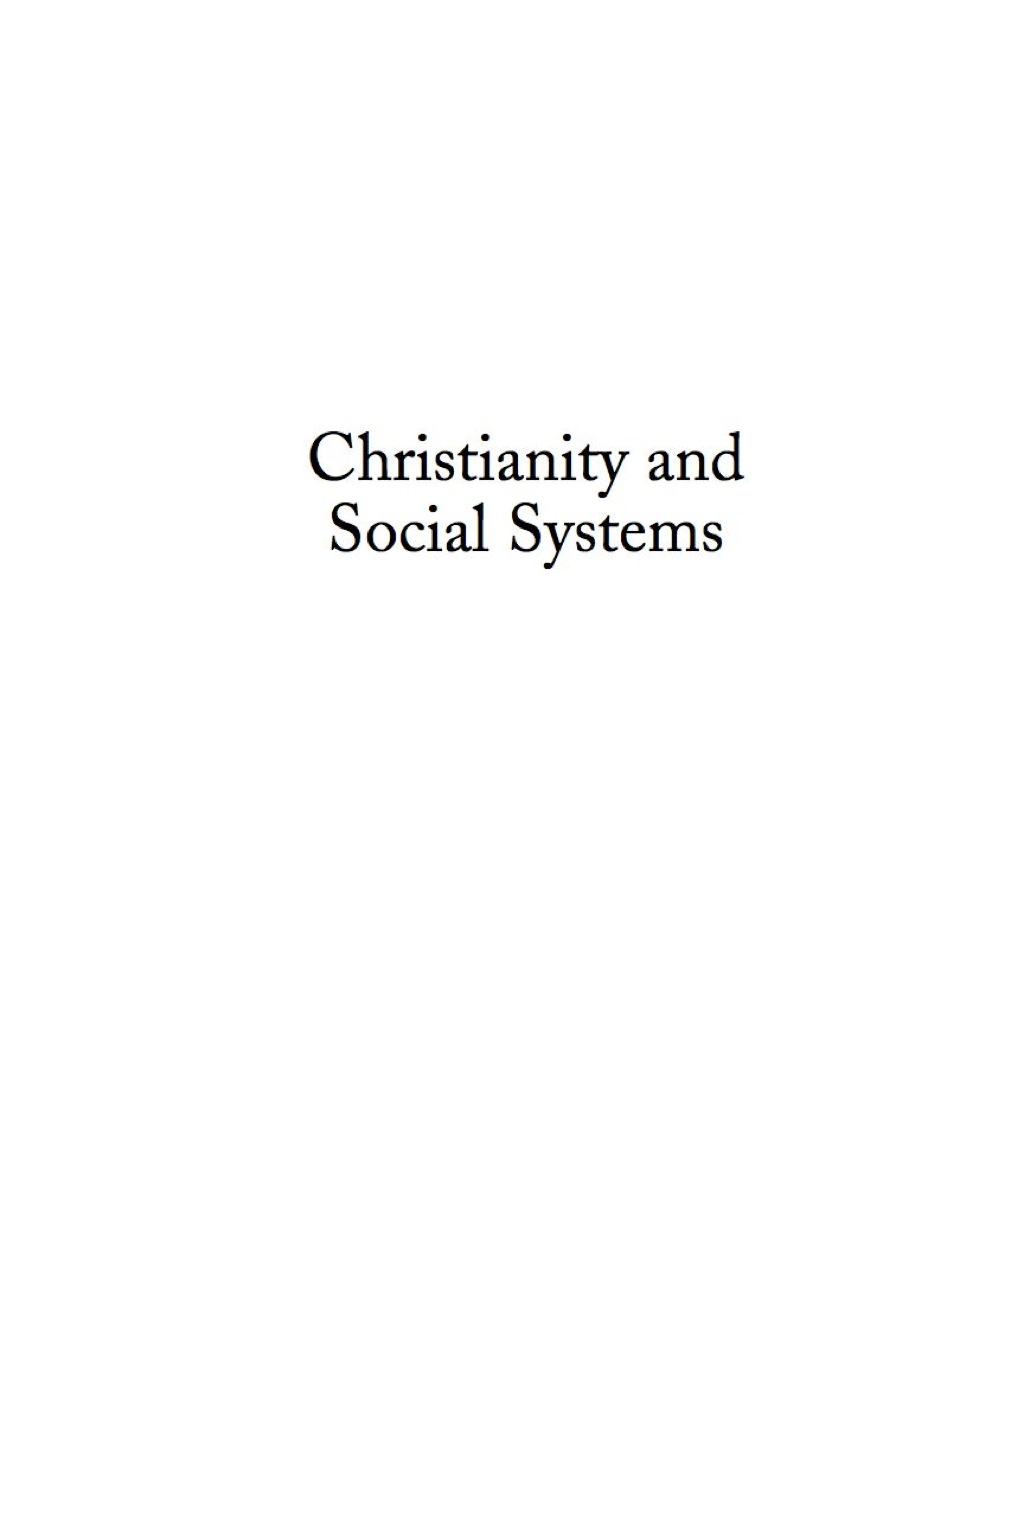 Christianity and Social Systems (eBook Rental) - Rosemary Radford Ruether,